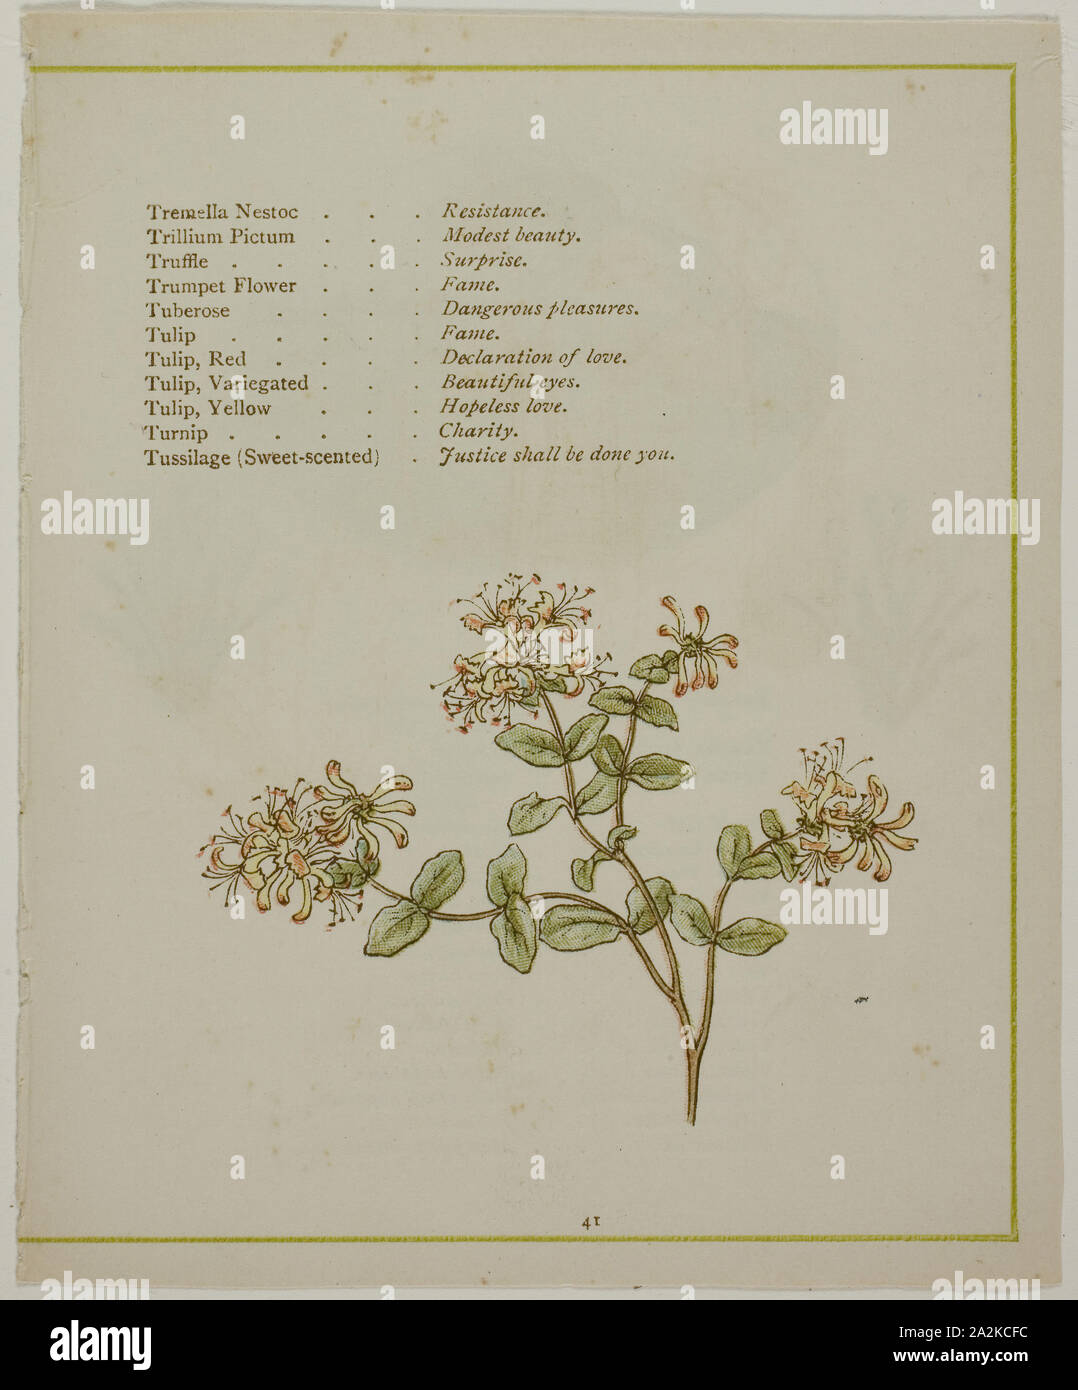 Valerian Through Volkamenia, from The Illuminated Language of Flowers, published 1884, probably Edmund Evans (English, 1826-1905), after Kate Greenaway (English, 1846-1901), printed by Edmund Evans, England, Color wood engraving (chromoxylograph) reproduction of a watercolor on paper Stock Photo